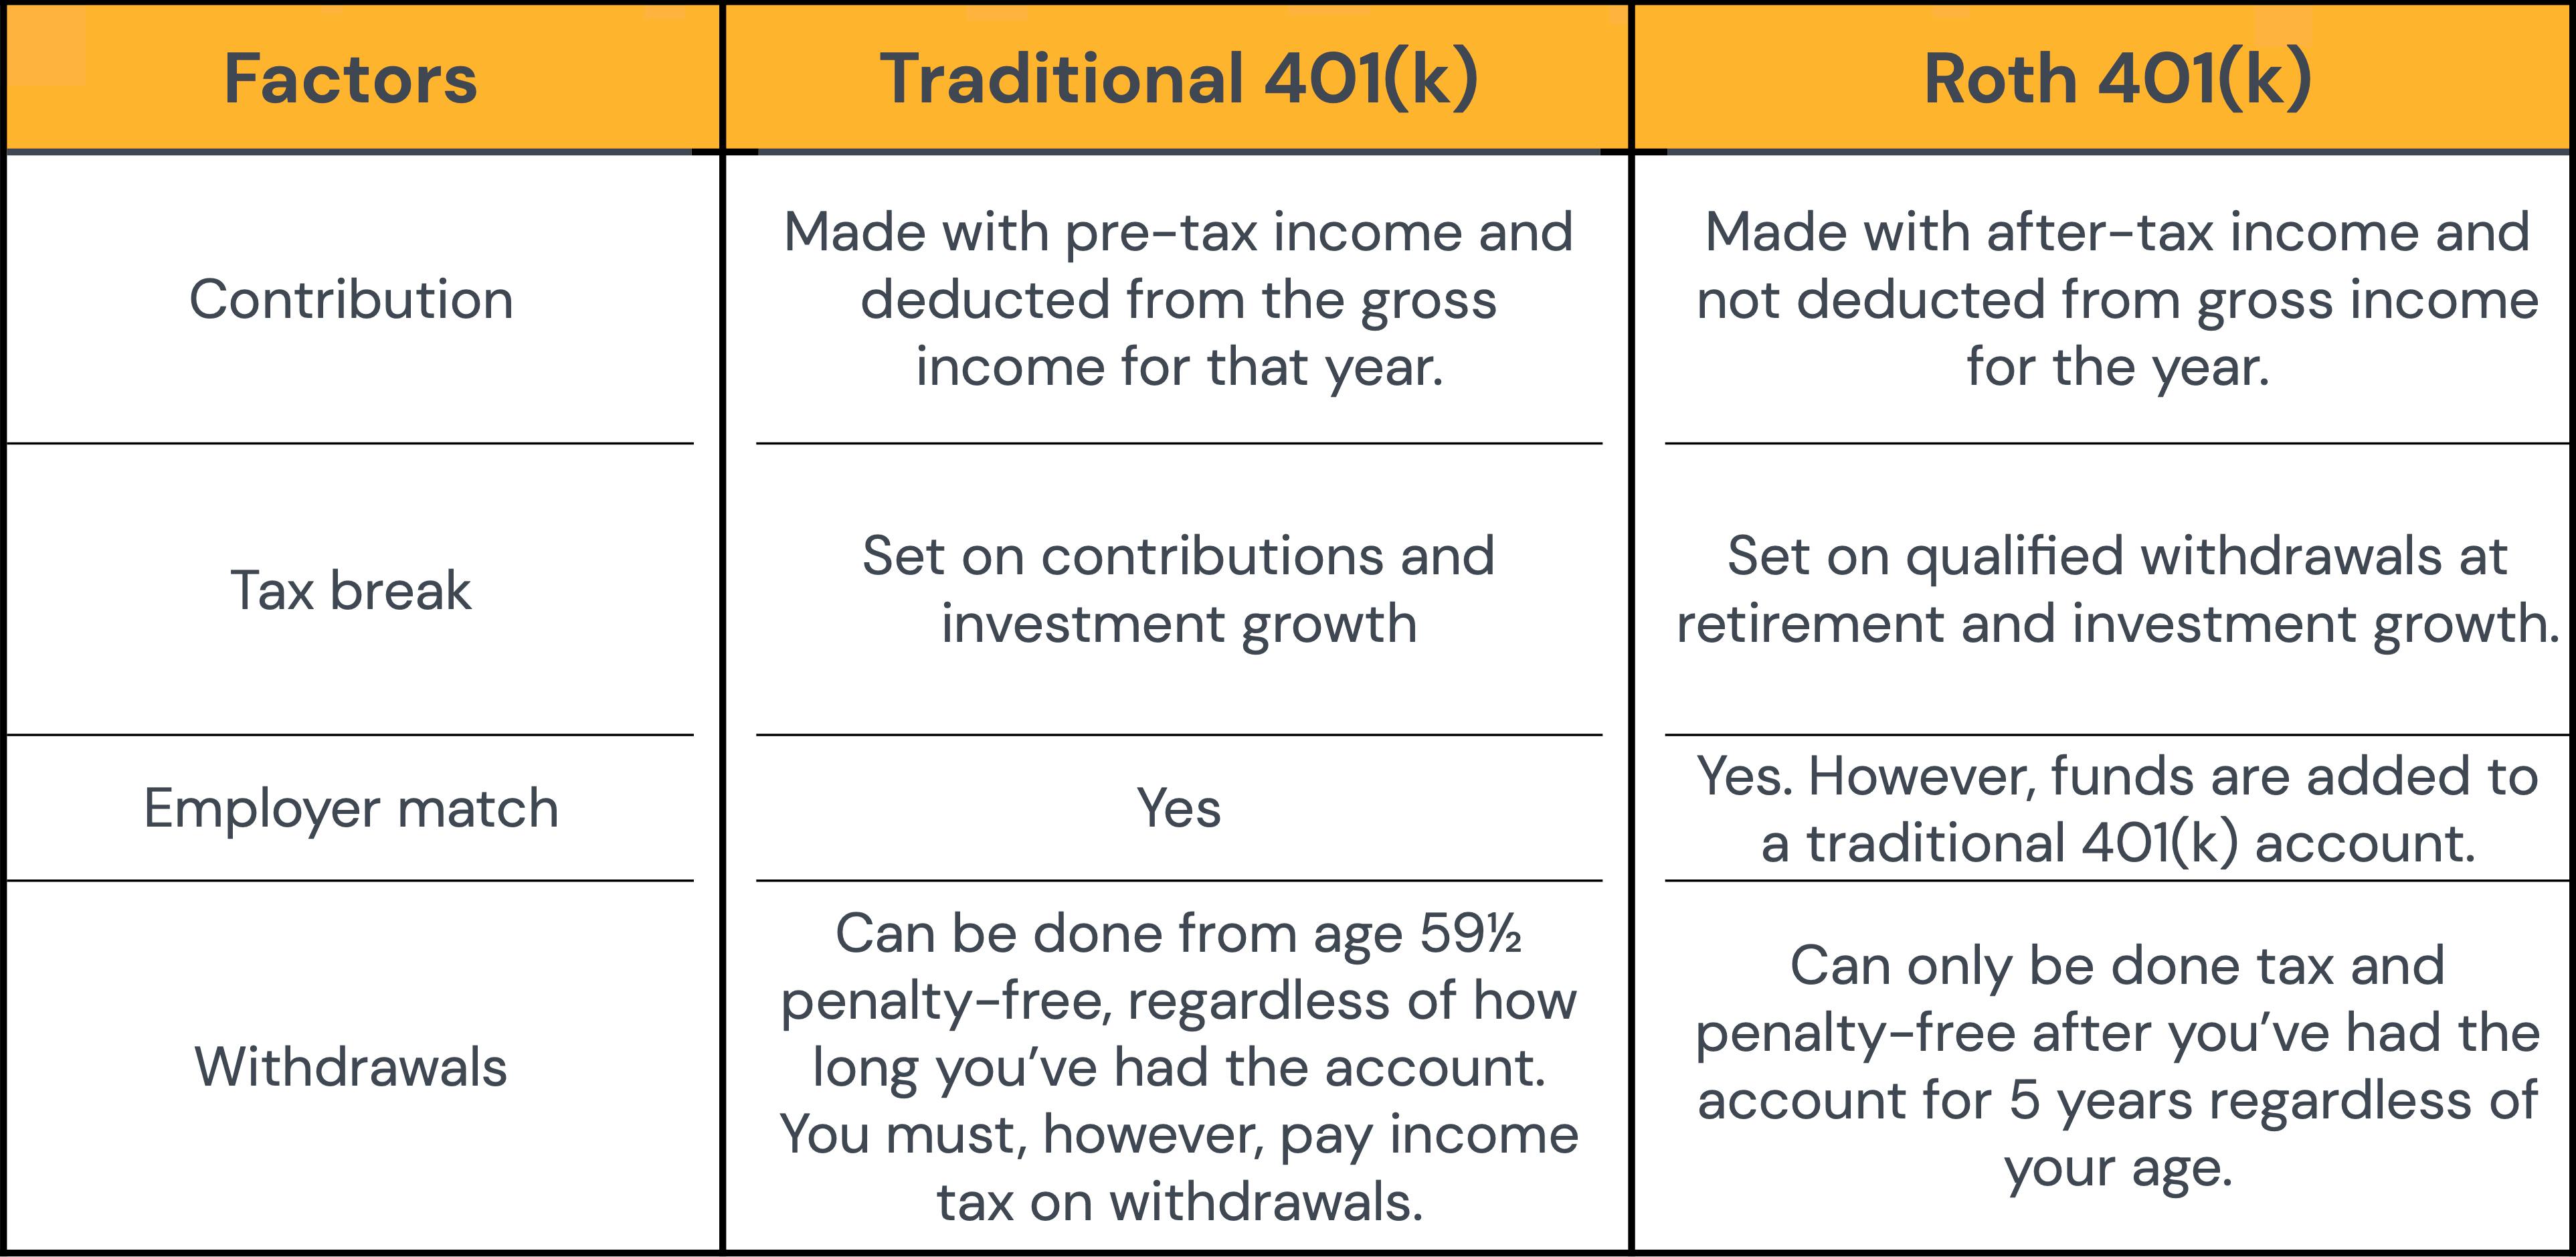 Table comparing traditional 401(k) with Roth 401(k)